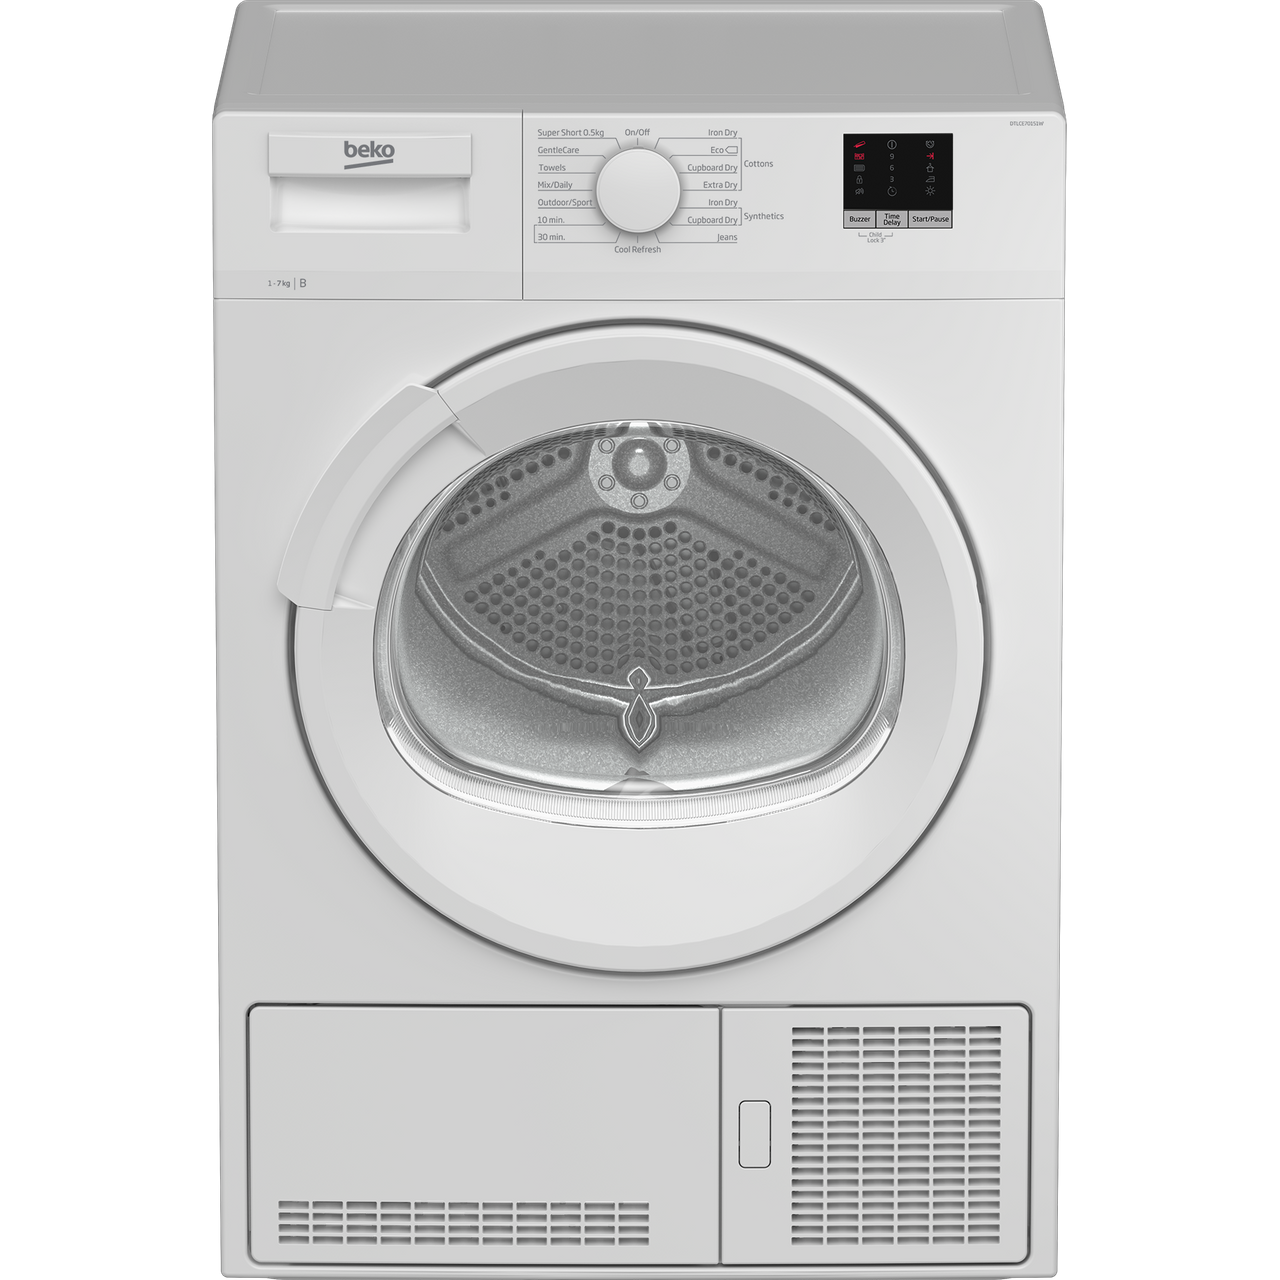 Beko DTLCE70151W 7Kg Condenser Tumble Dryer Review